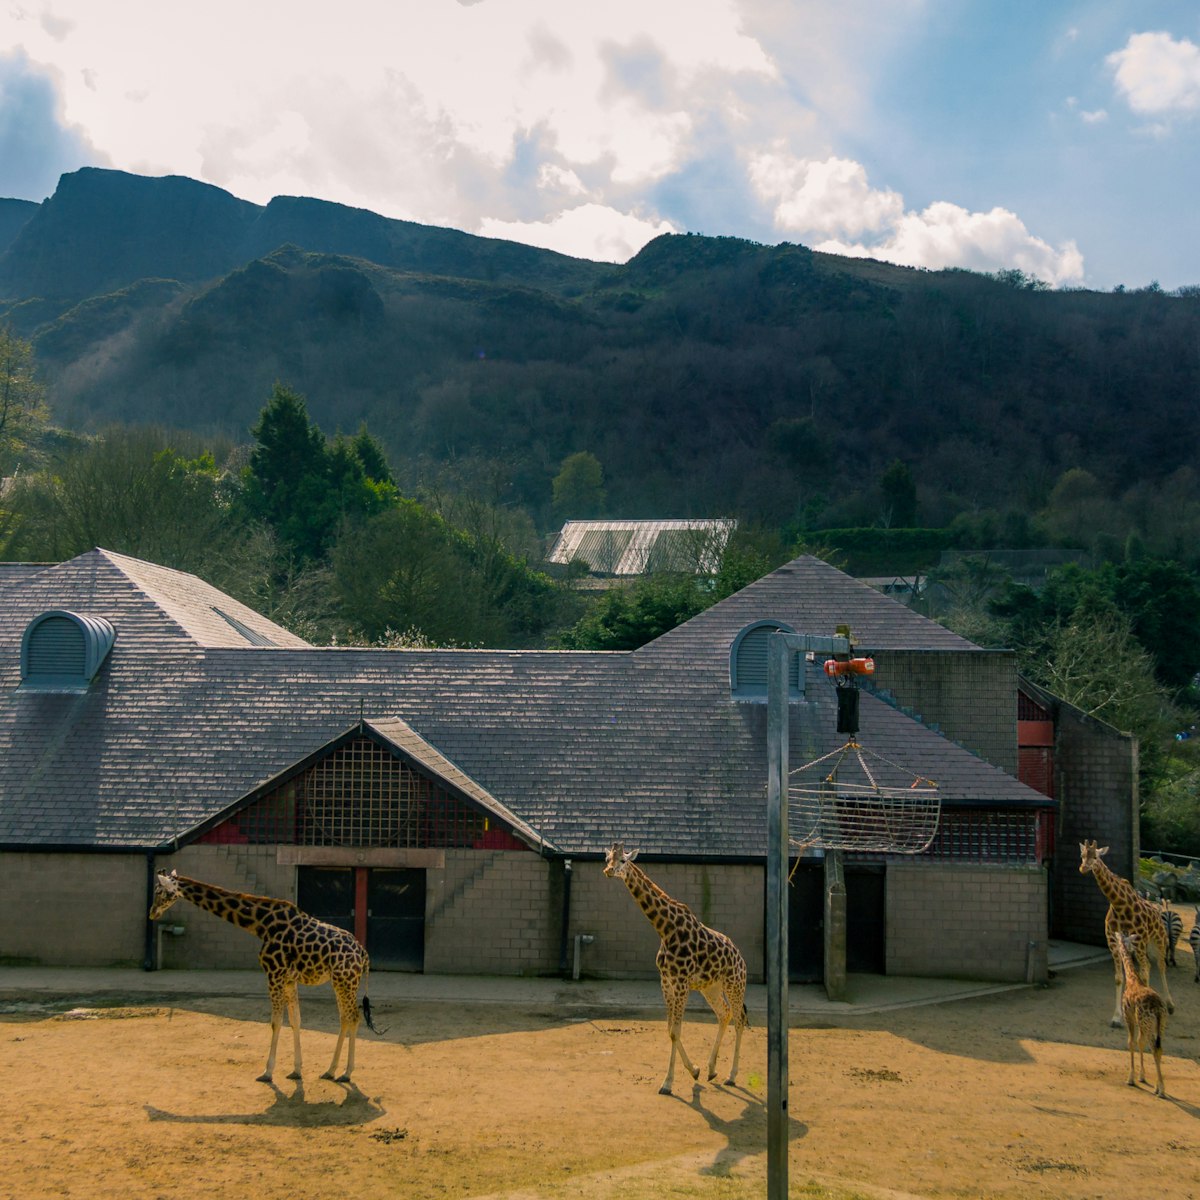 500px Photo ID: 105147659 - Giraffe enclosure at Belfast Zoo, in the shadow of Cavehill